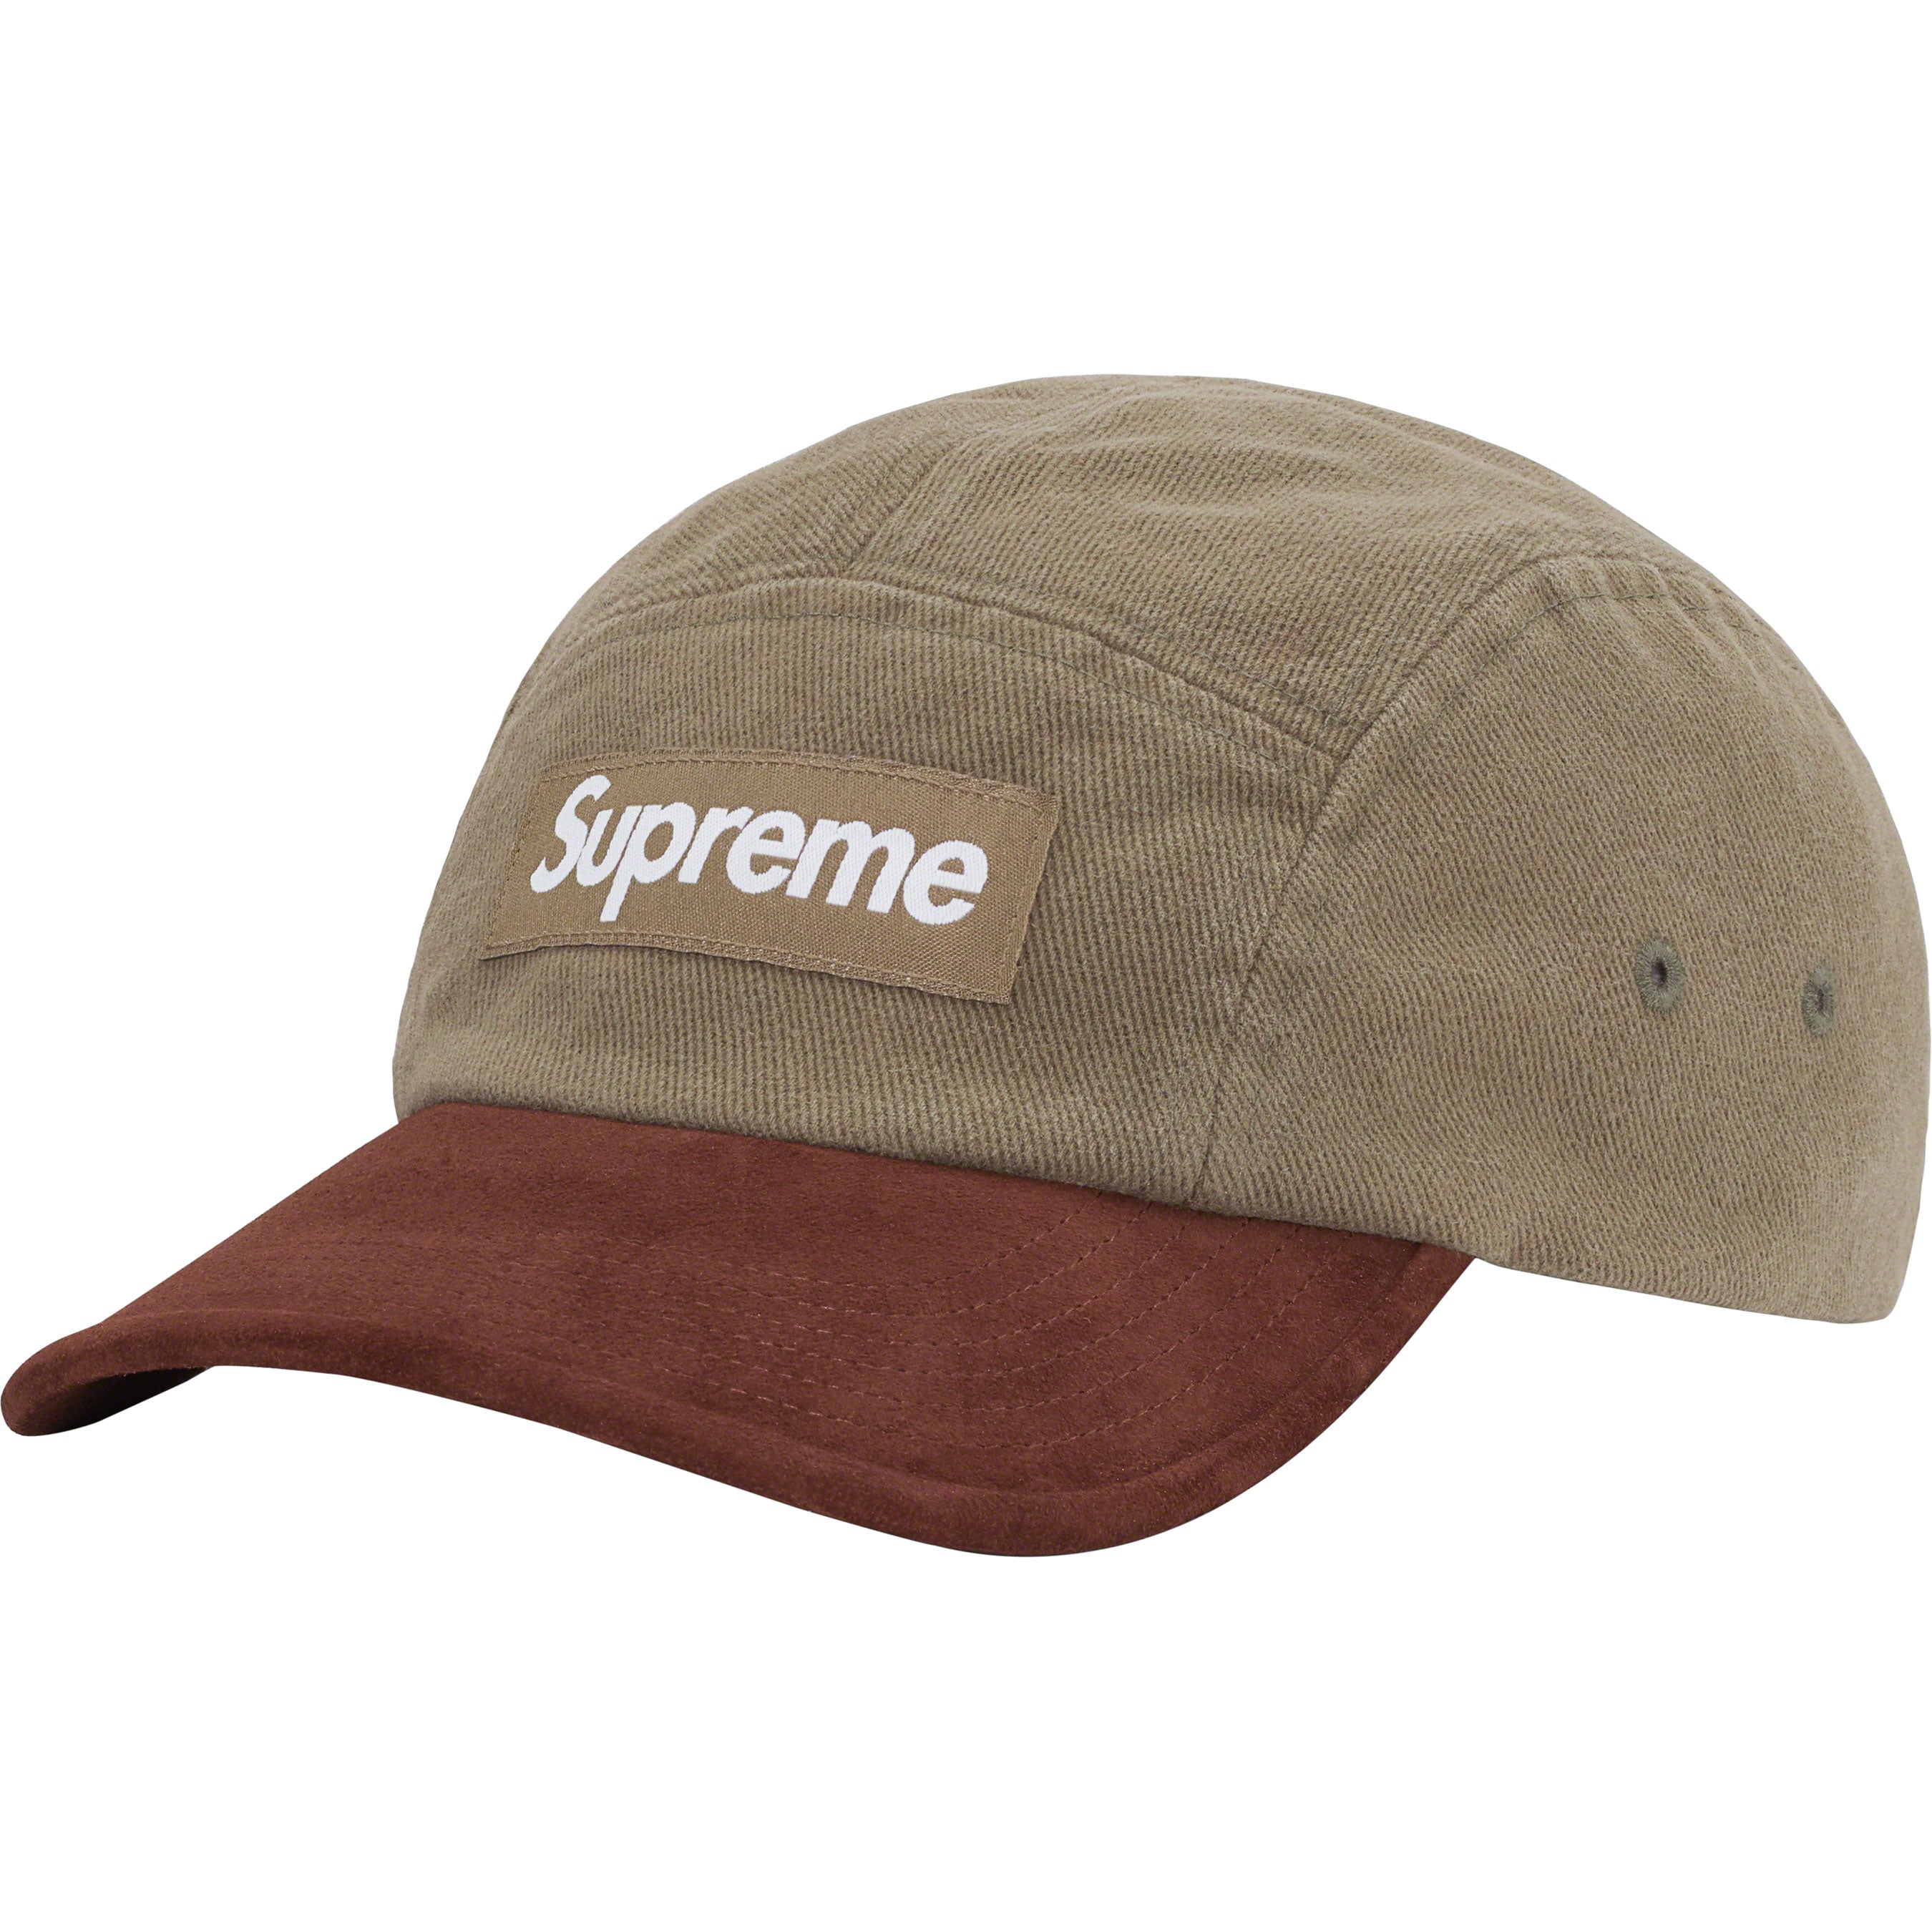 SUPREME SUEDE VISOR CAMP CAP BLACK SS23 WEEK 15 (100% AUTHENTIC) BRAND NEW